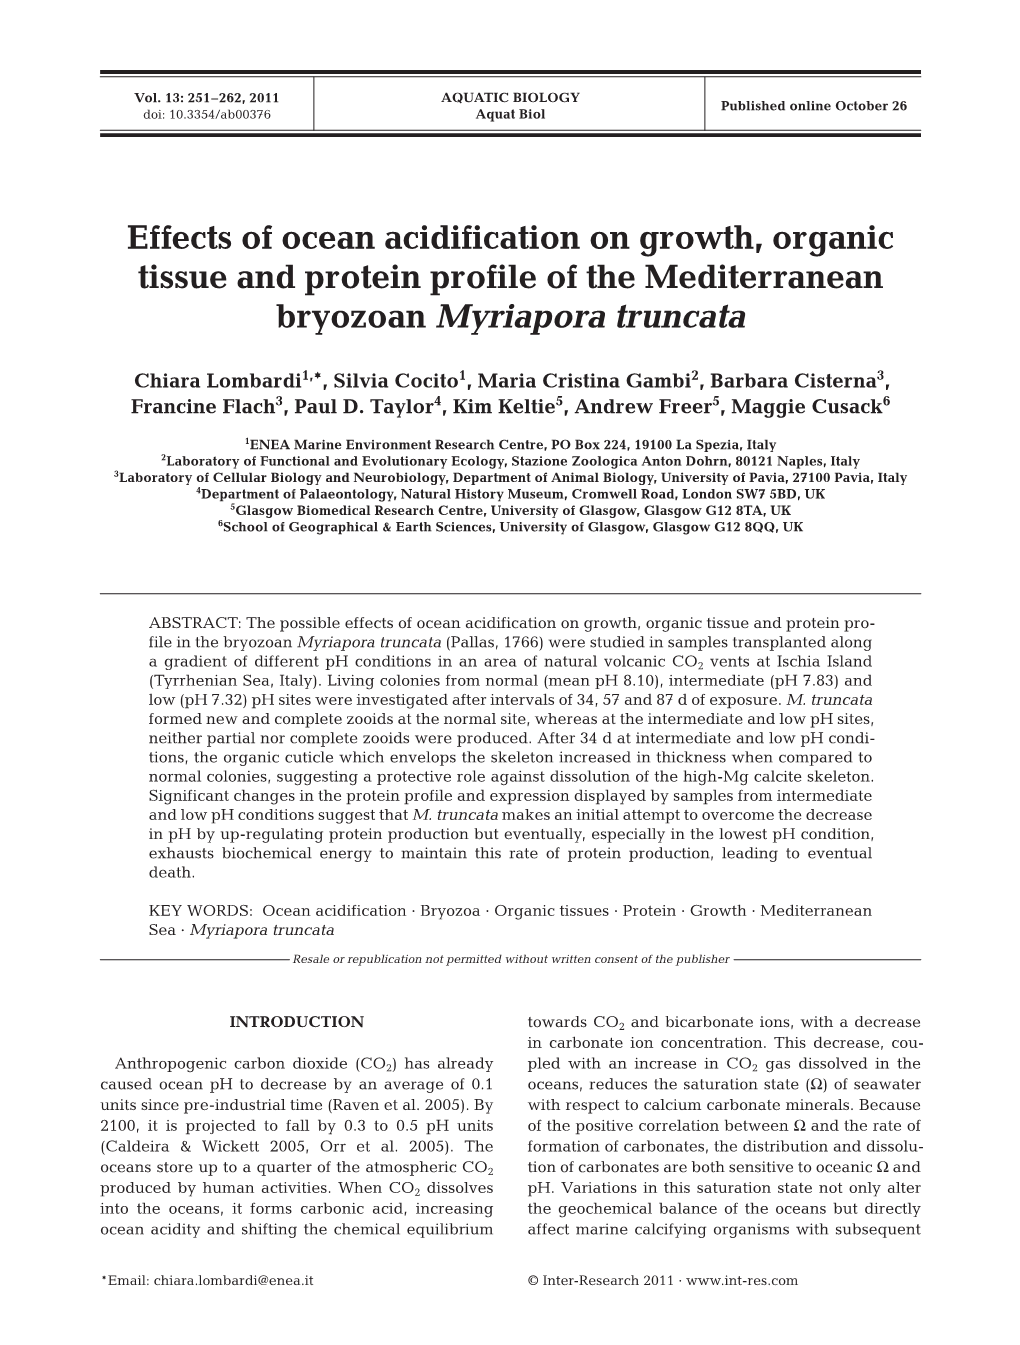 Effects of Ocean Acidification on Growth, Organic Tissue and Protein Profile of the Mediterranean Bryo Zoan Myriapora Truncata